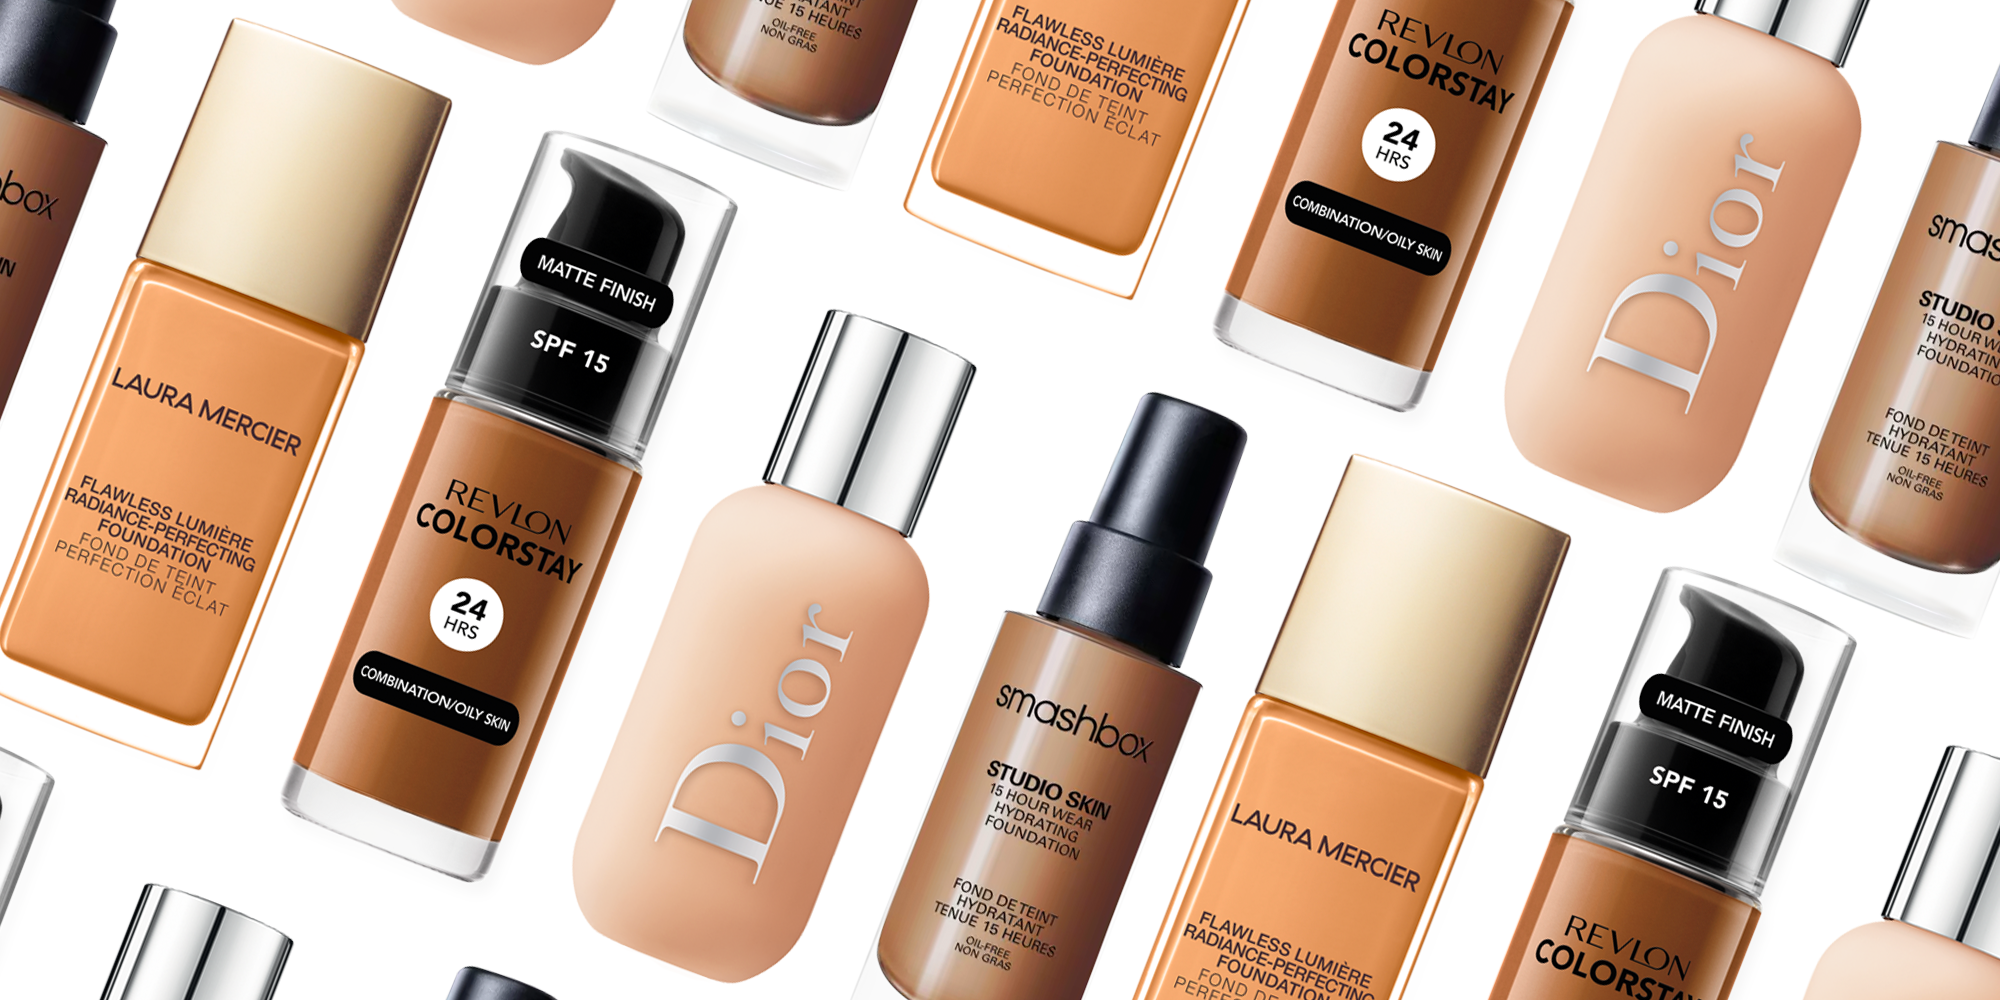 How to choose the best face primer for oily skin